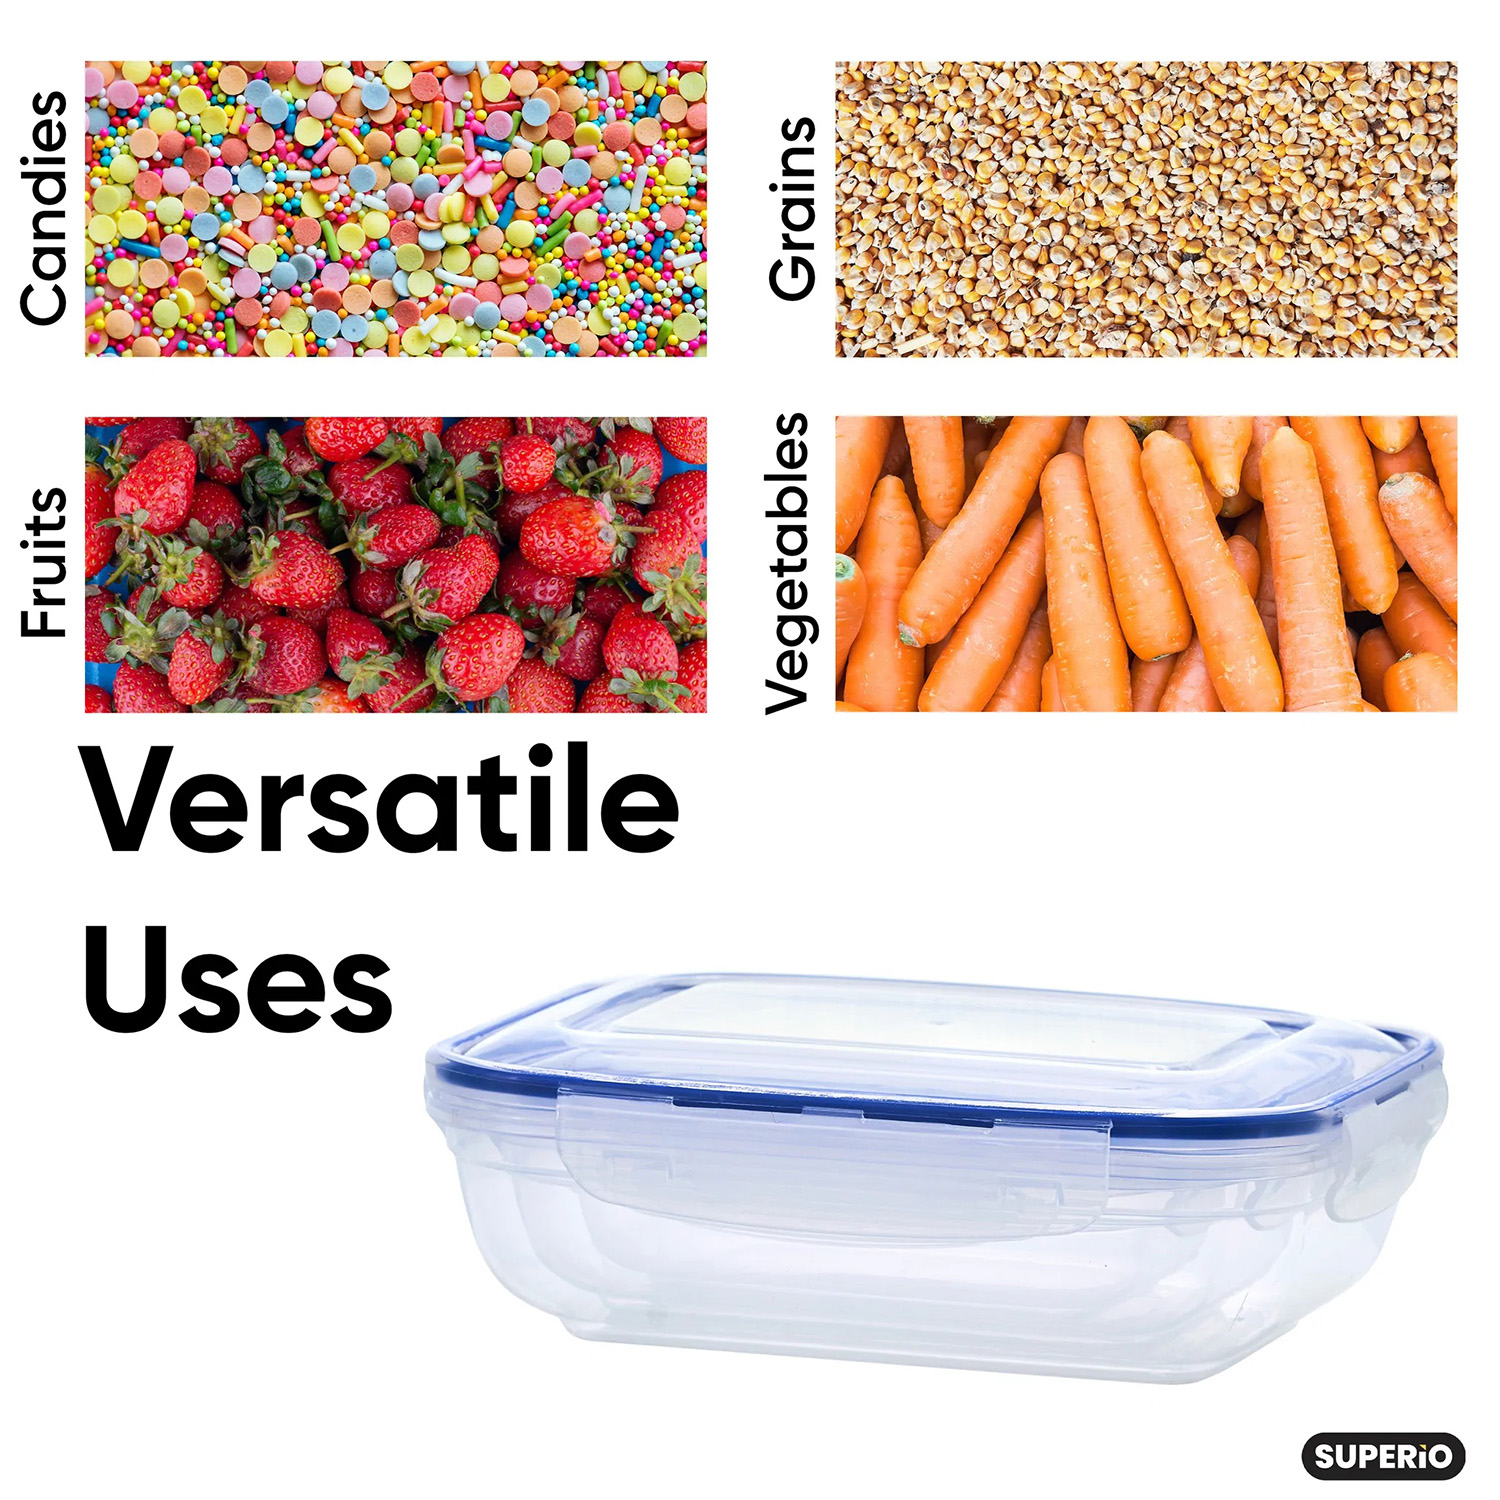 Yirtree Airtight Plastic Food Storage Container, Rectangular Small Storage Boxes, Microwave, Freezer and Dishwasher Safe, Size: 5.04 x 4.53 x 3.54